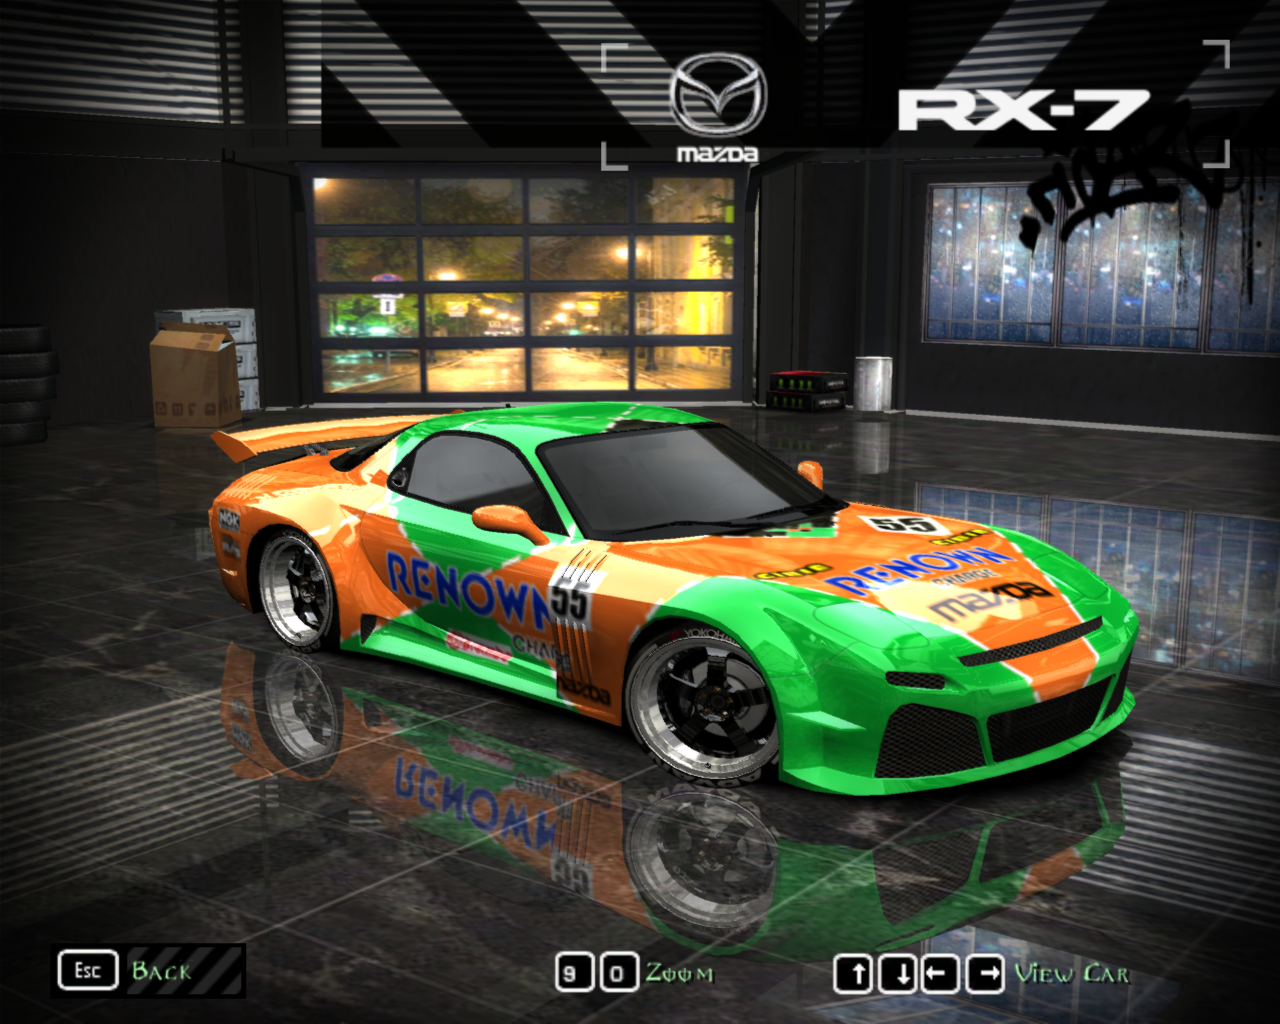 Need For Speed Most Wanted Mazda RX-7 787b Renown livery